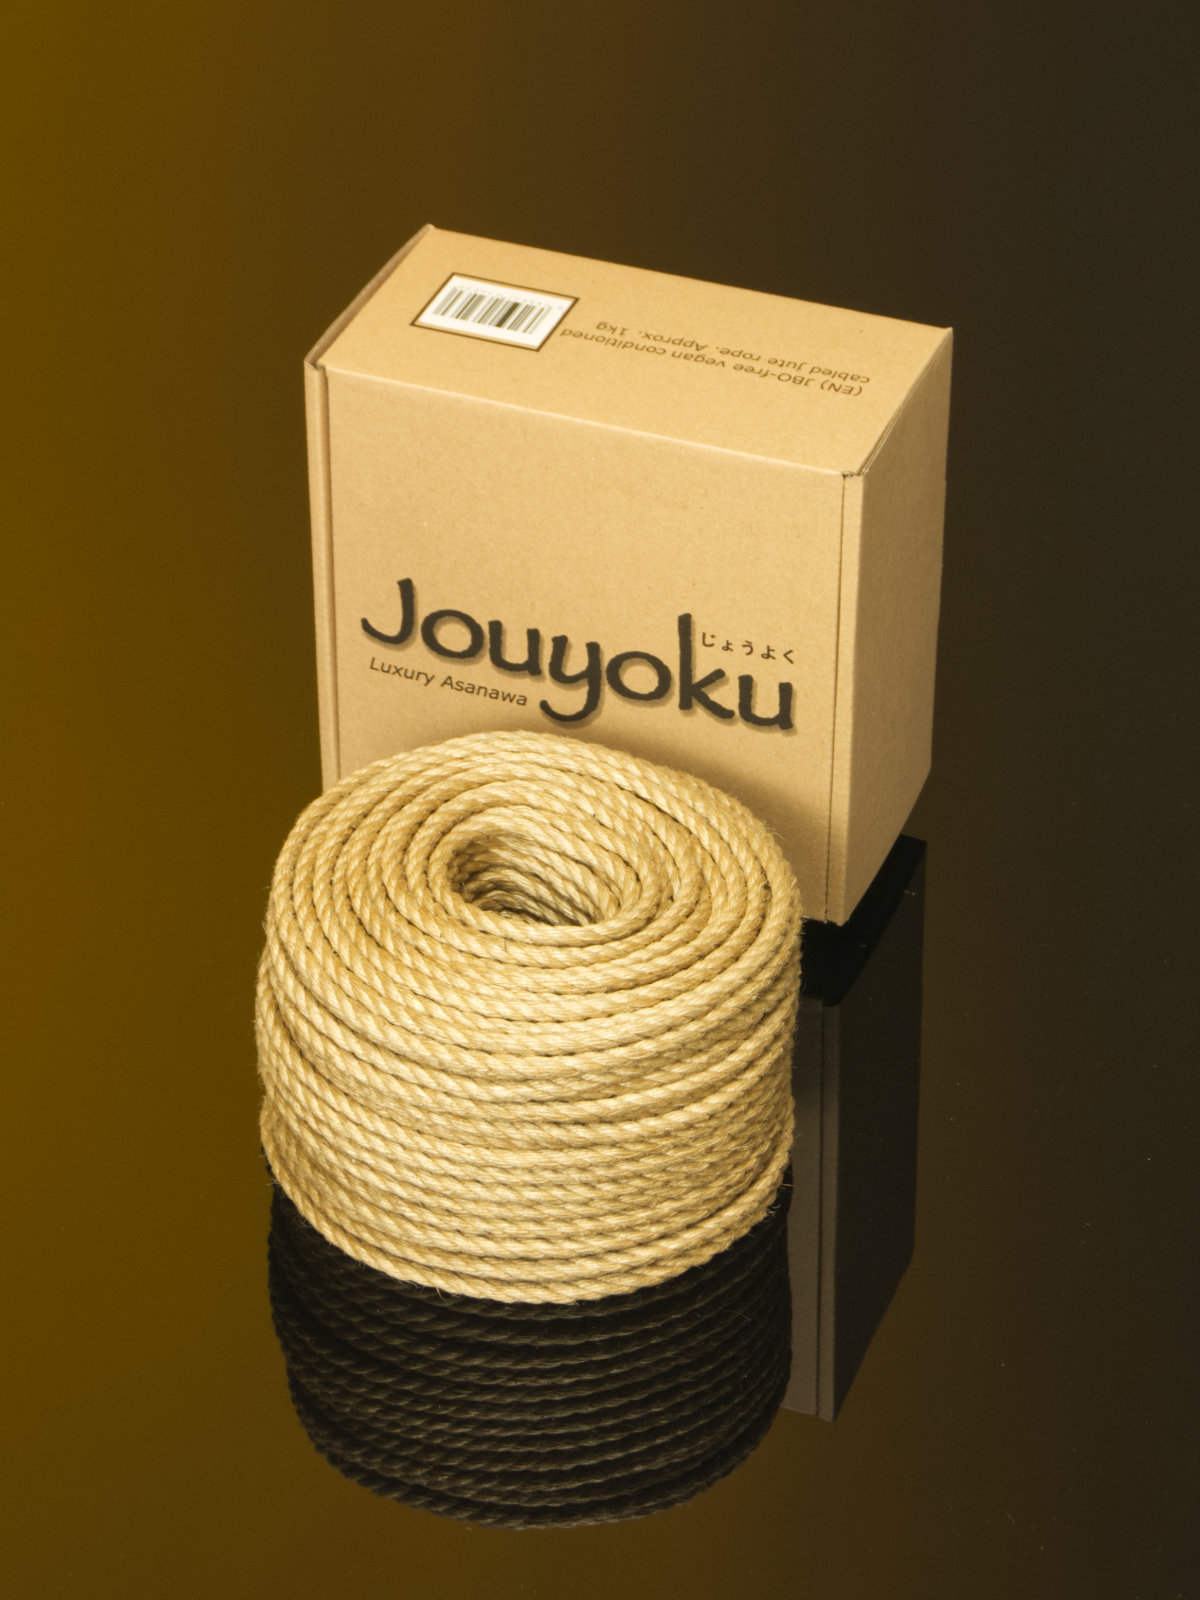 ∅ 4.5mm Jouyoku MINI-ROLL, ~1kg,  65m, ready-for-use Japanese-made jute rope, JBO-free 